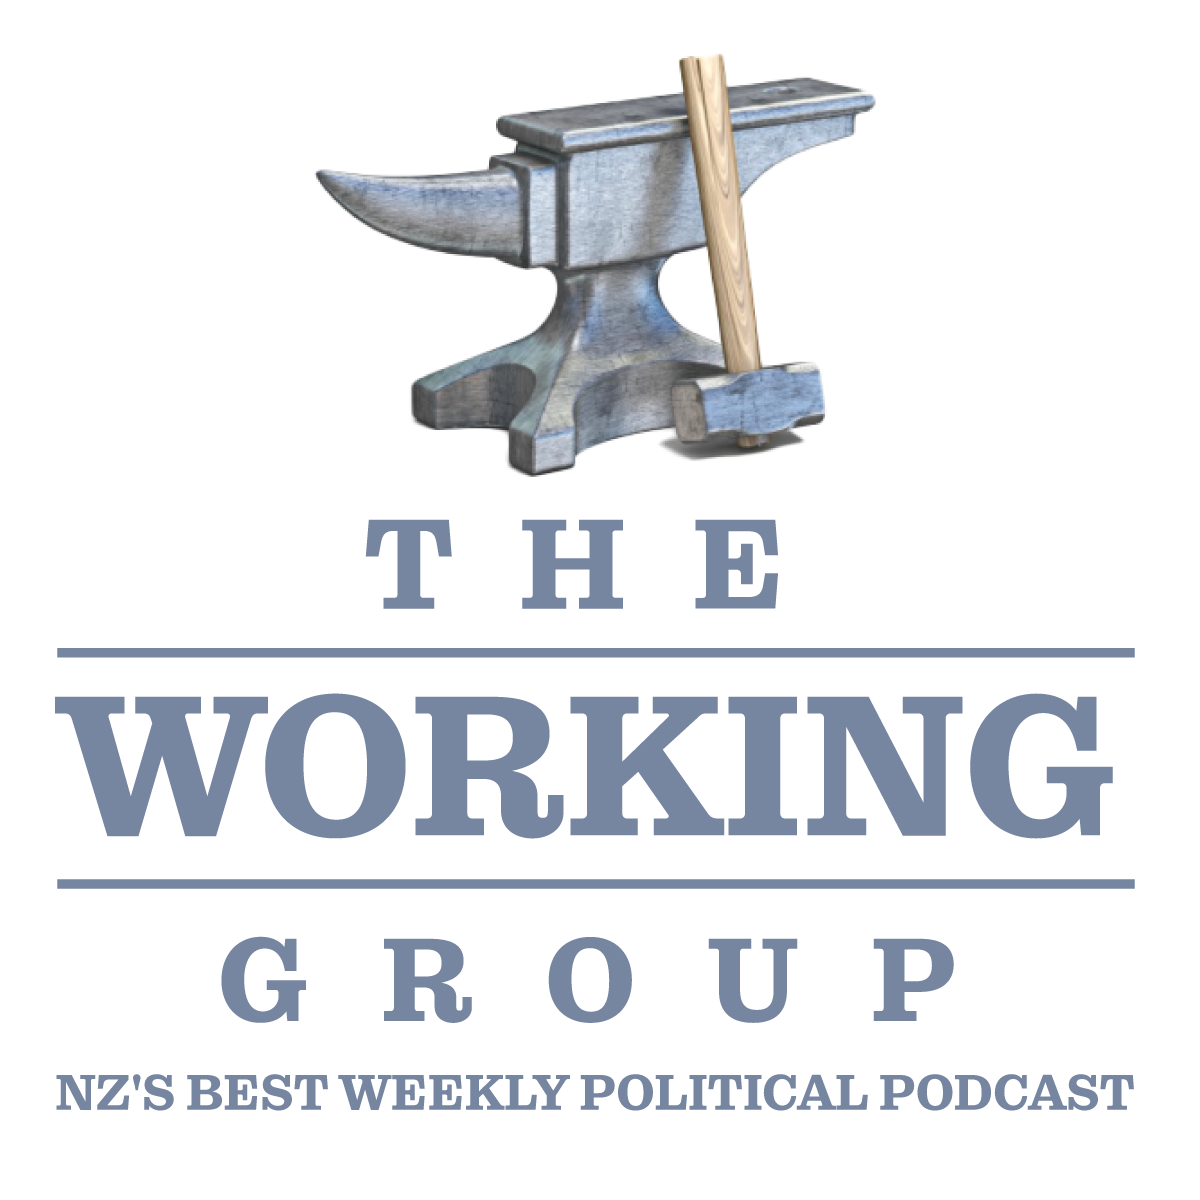 New Zealand's Political Chess: Who Wins in Tax Cuts and Social Reforms? With Bradbury's Best, Shane Te Pou, JohnTamihere and Damien Grant